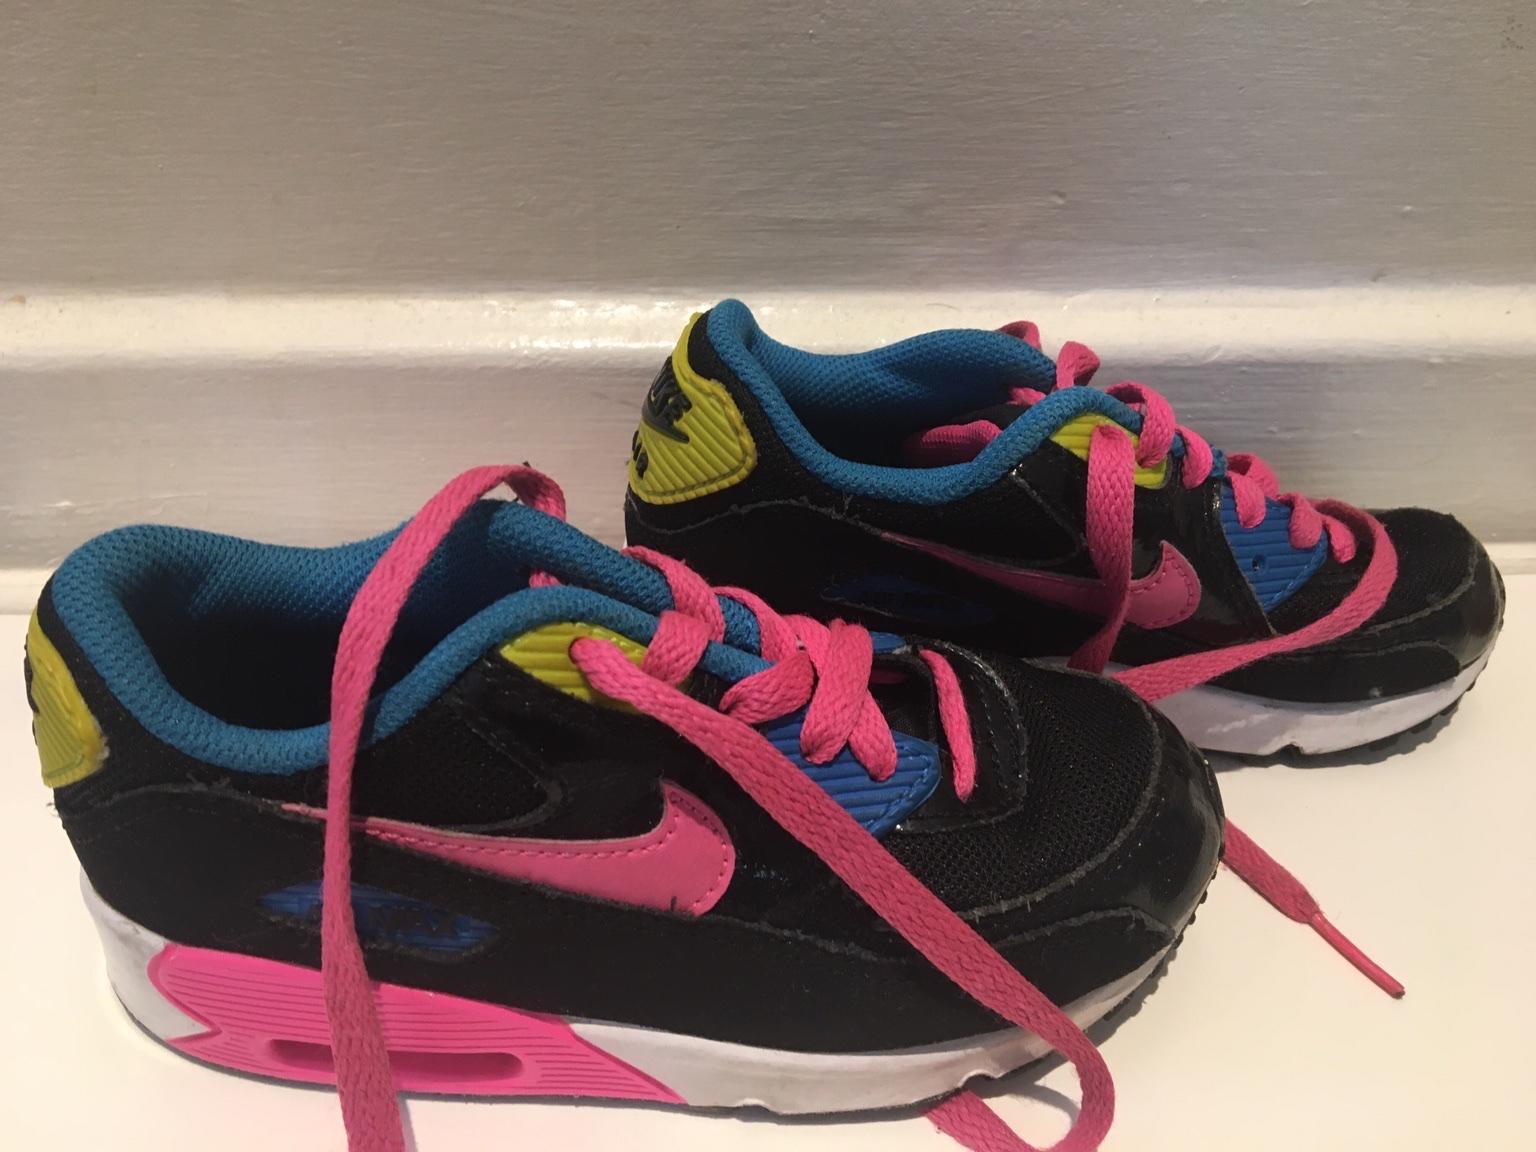 girls black and pink nike trainers